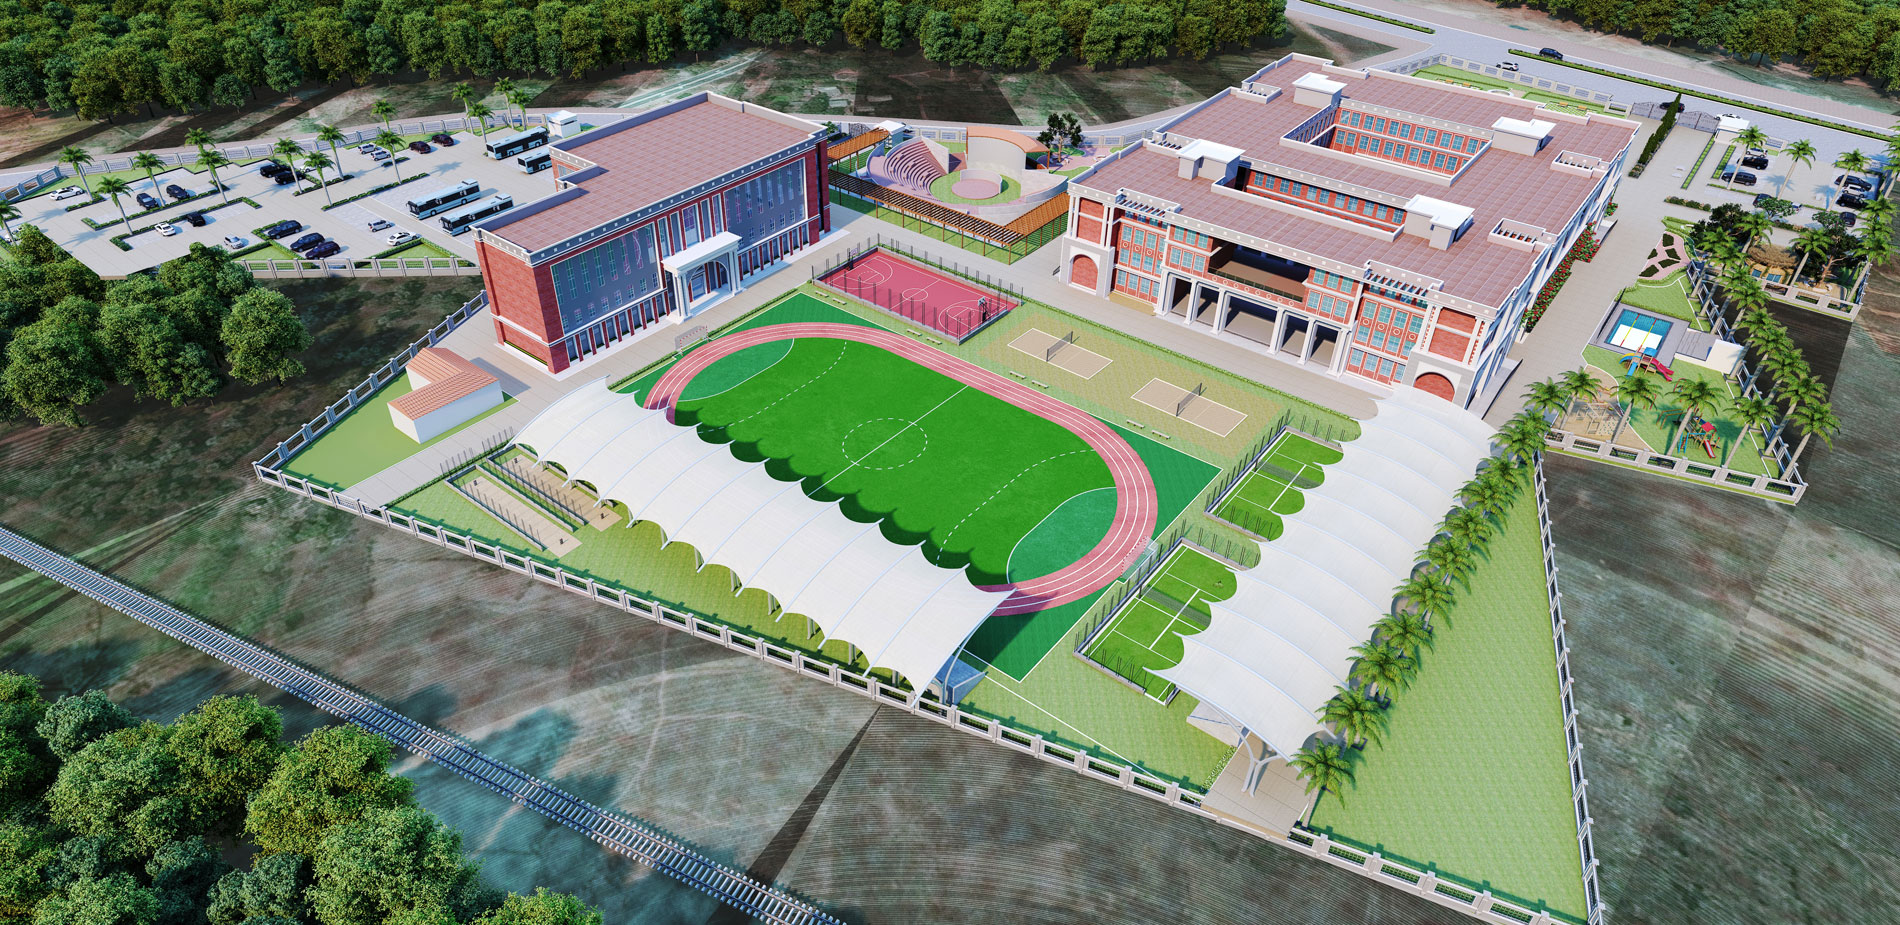 INDIA'S BEST SCHOOL ARCHITECTURE SERVICES